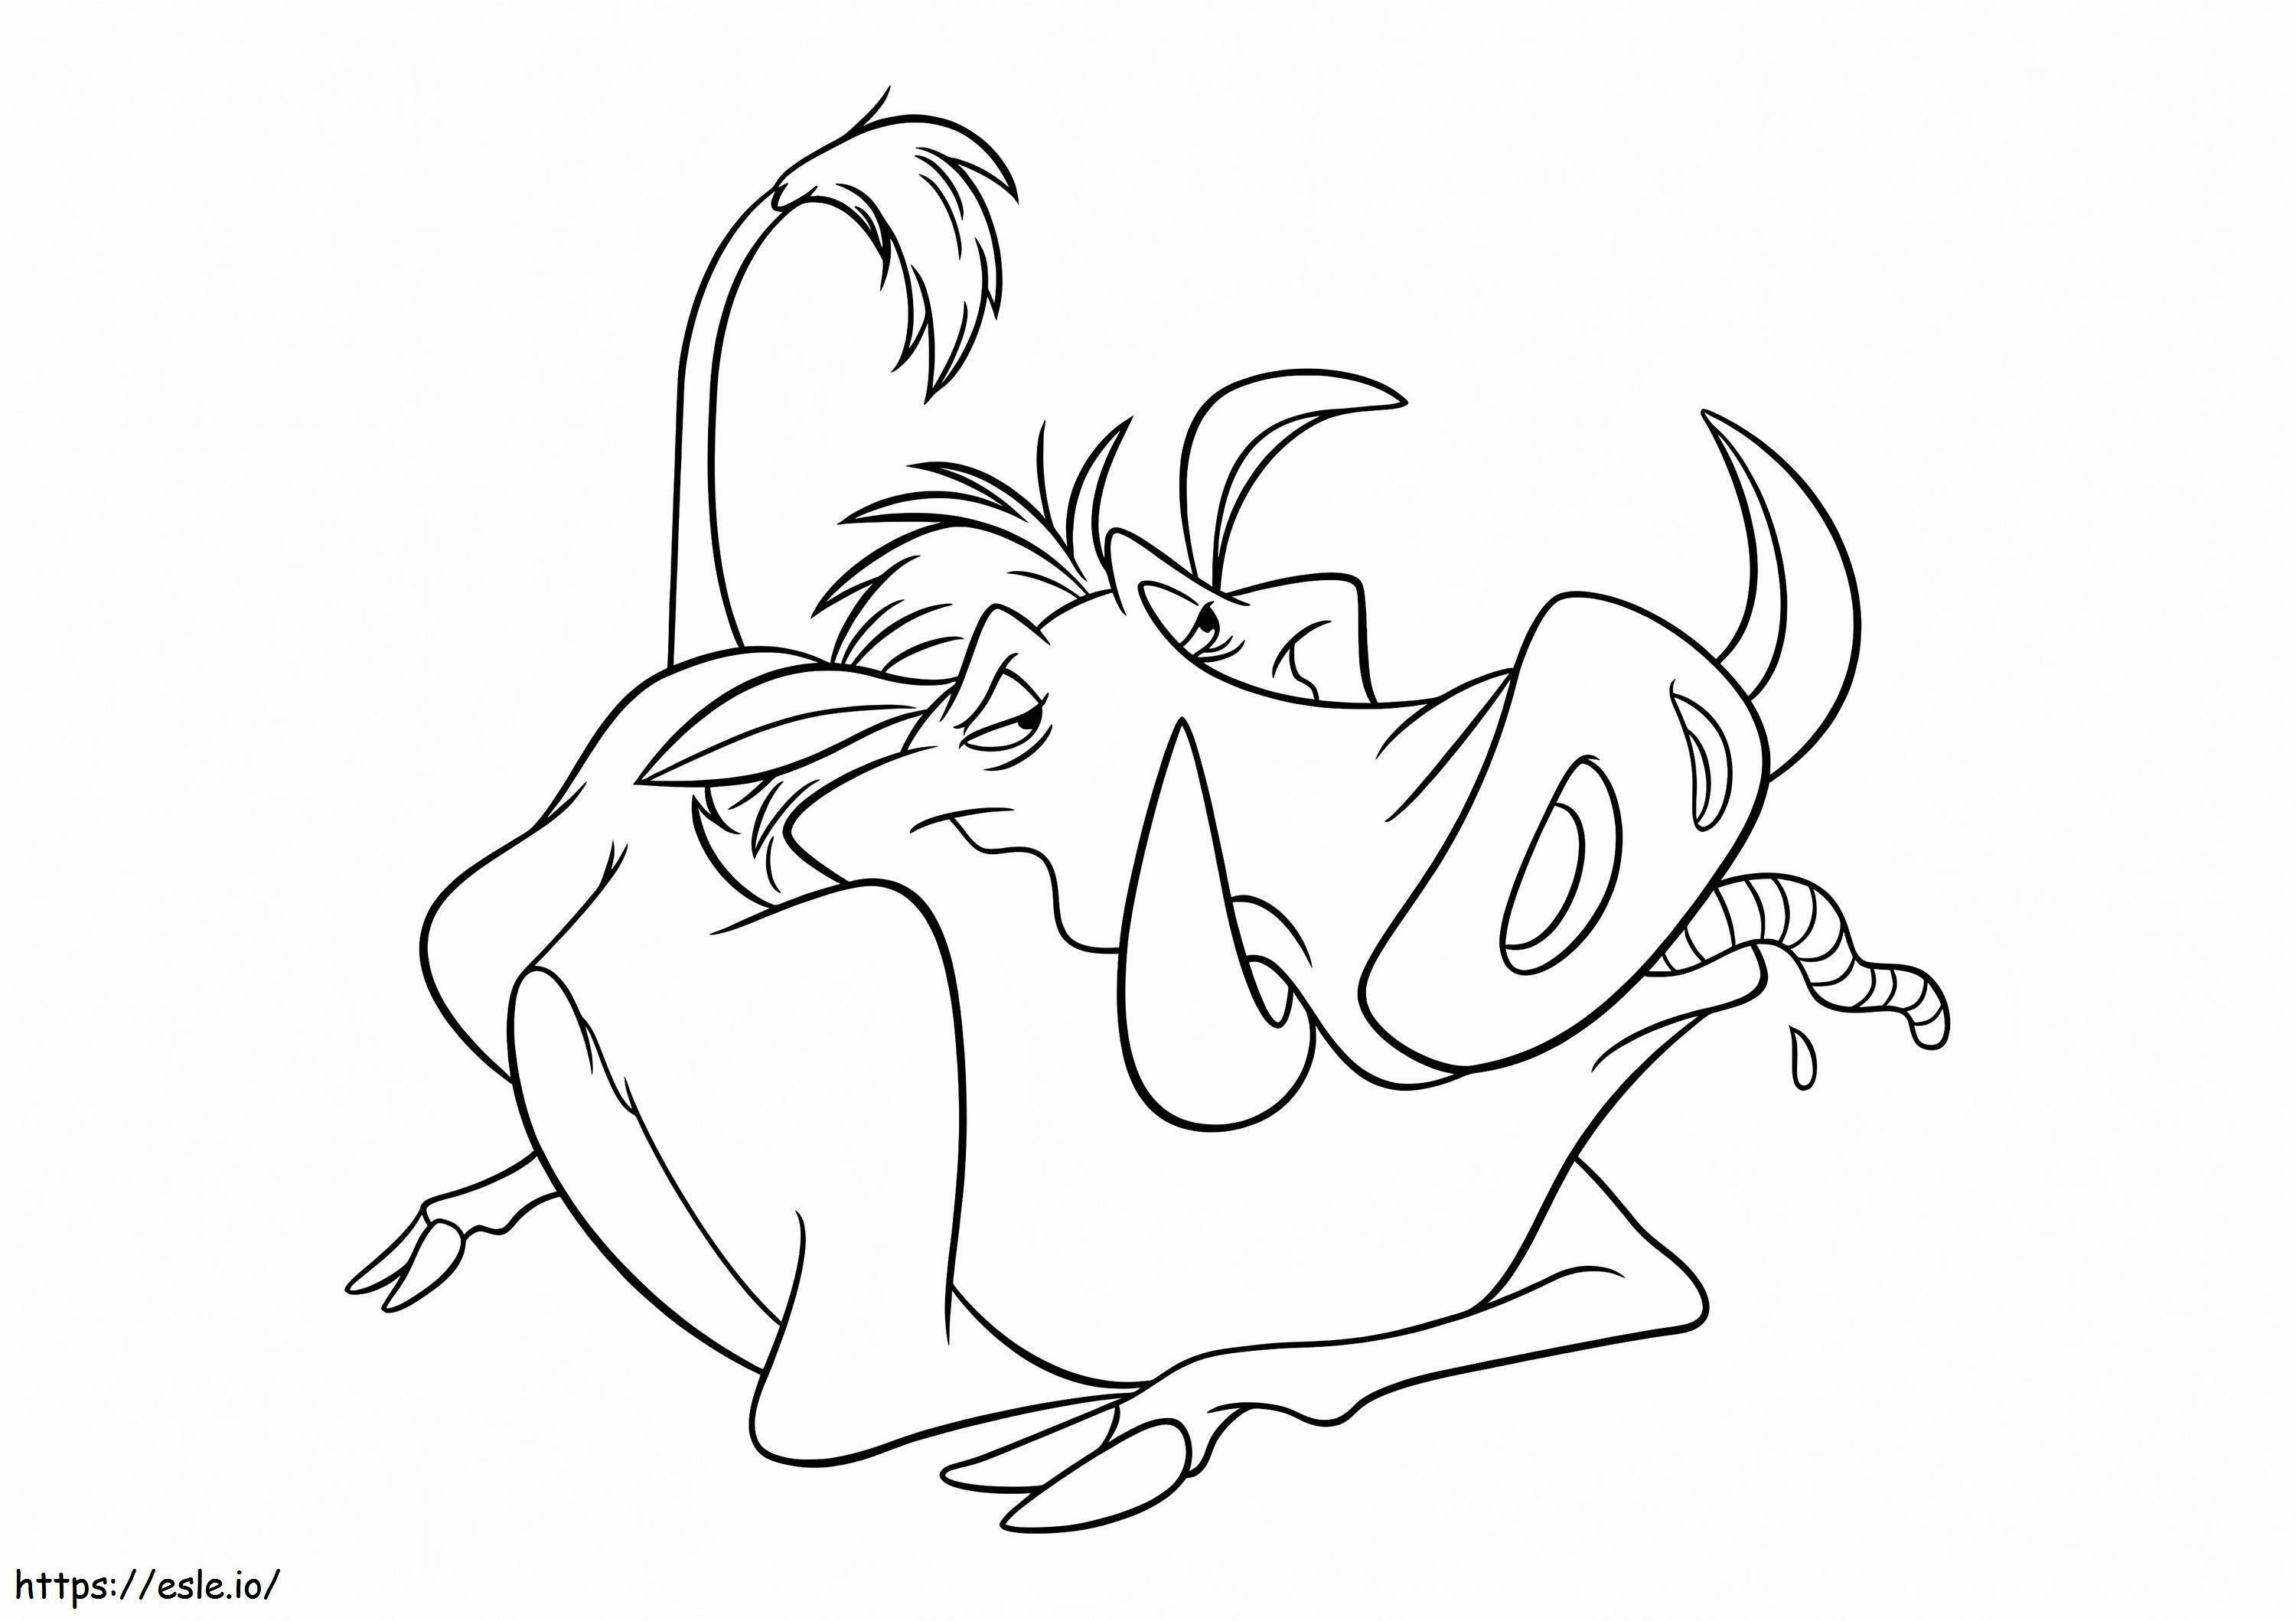 Pumbaa Eats Worm coloring page